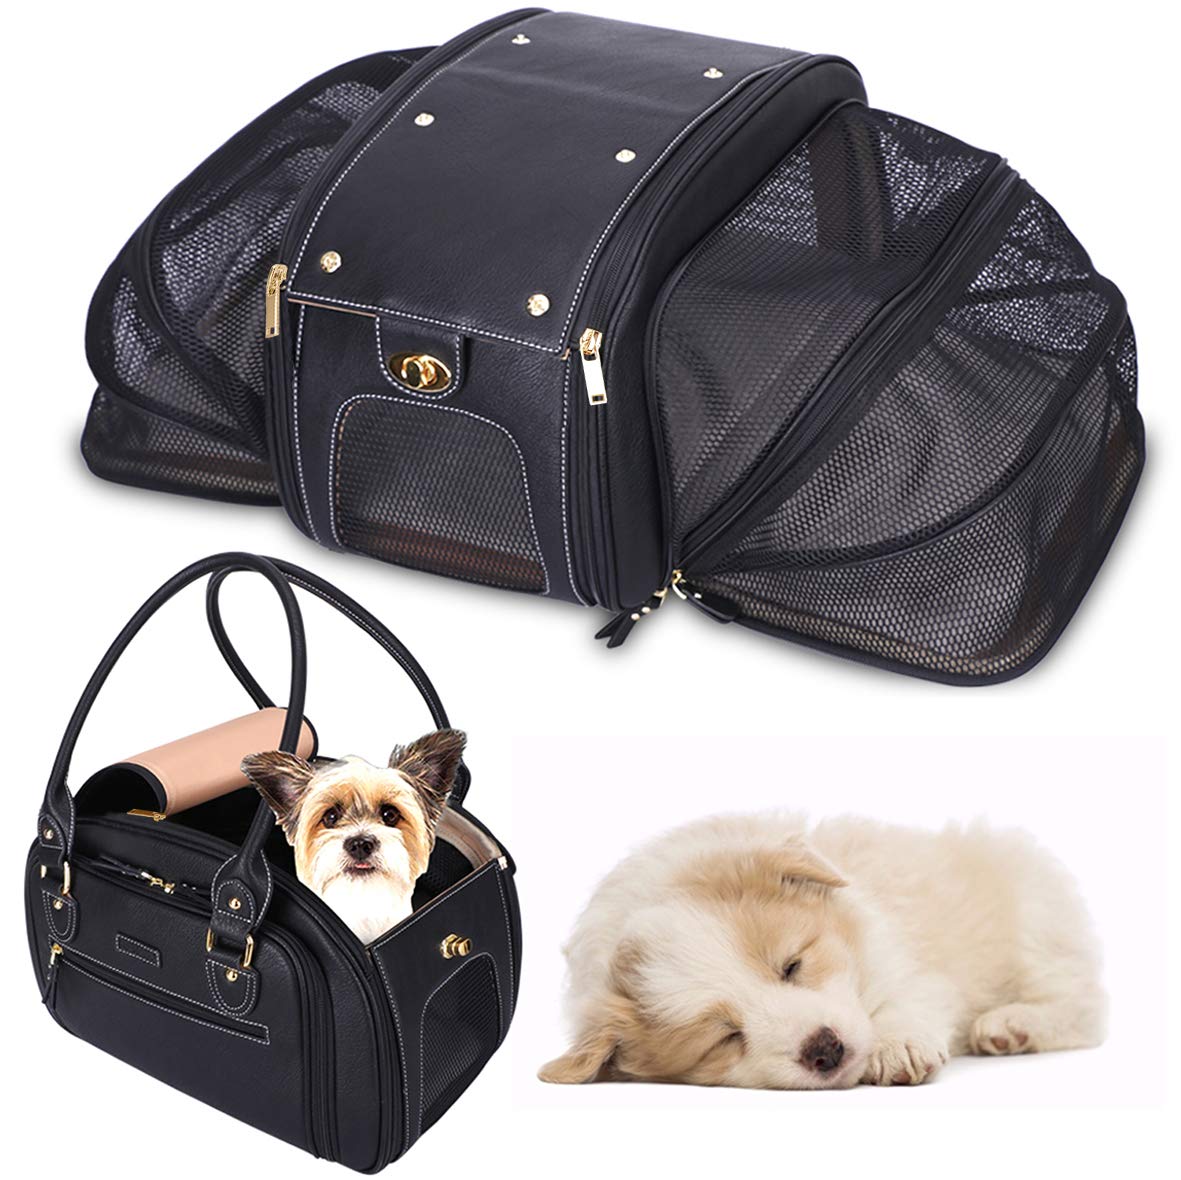 PetsHome Dog Carrier, Pet Carrier, Cat Carrier, Expandable Foldable Airline Approved Leather Pet Travel Portable Bag Carrier for Cat and Small Dog ...